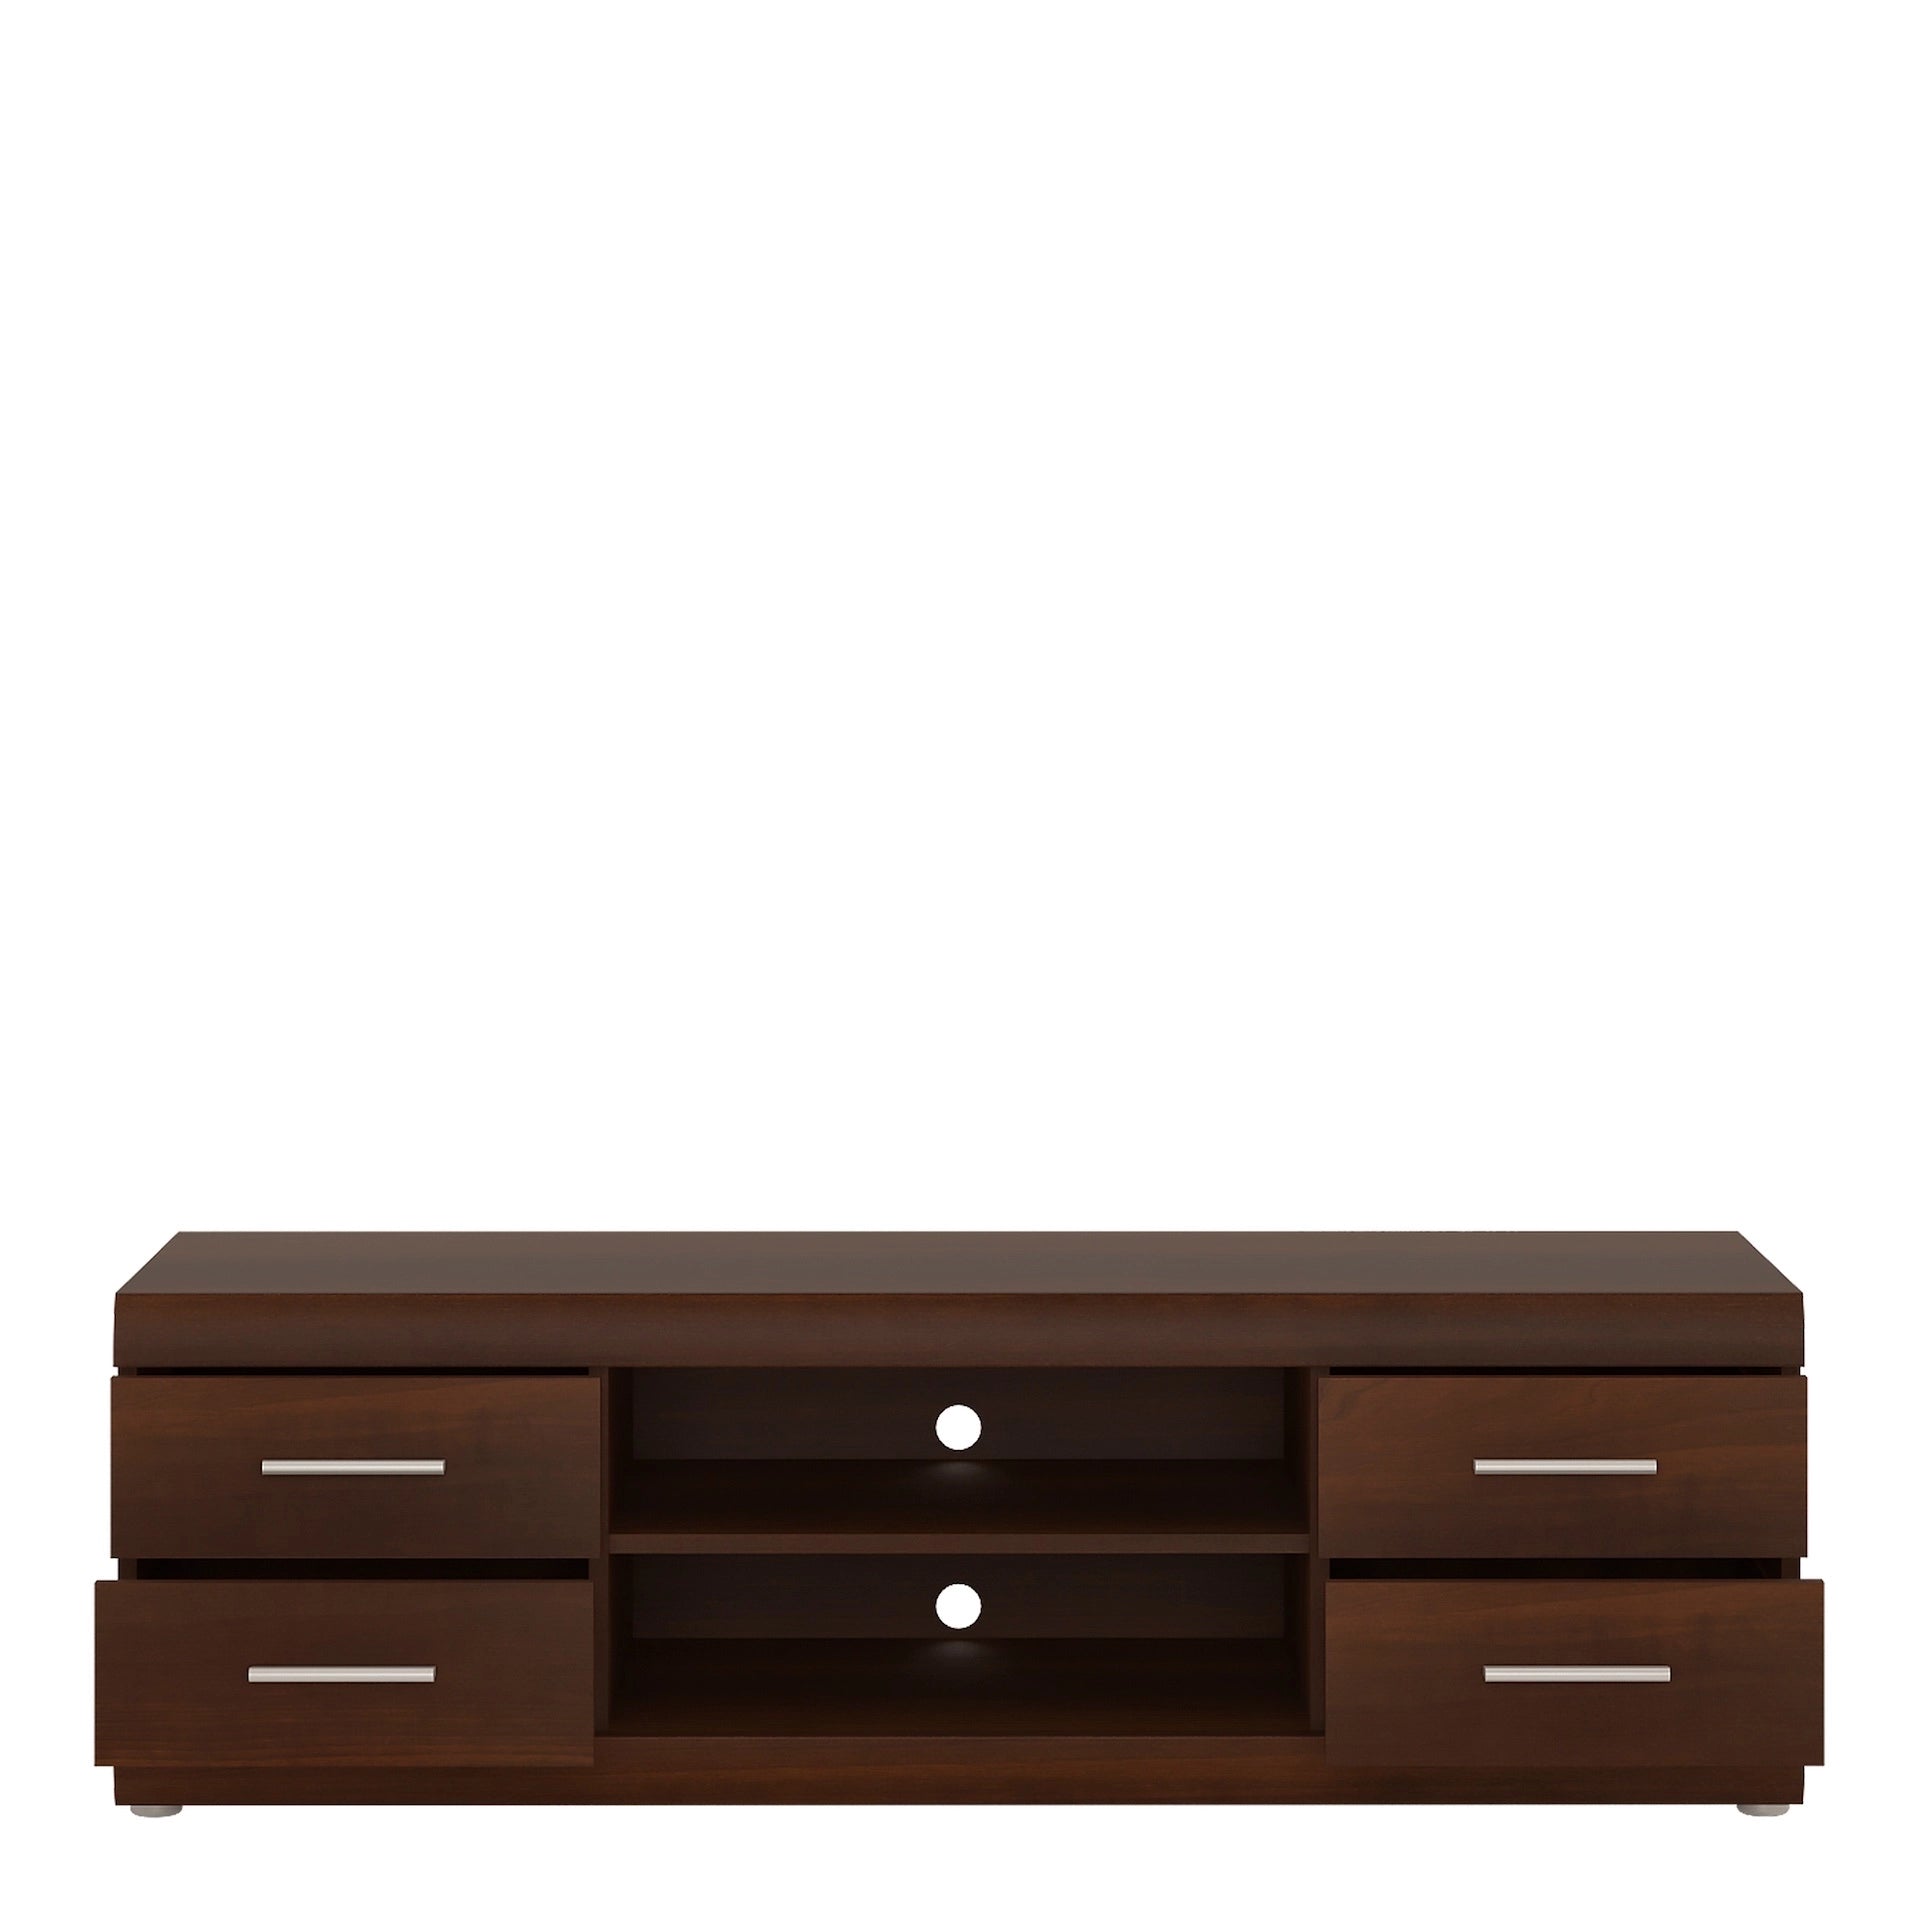 Furniture To Go Imperial Wide 4 Drawer TV Cabinet in Dark Mahogany Melamine